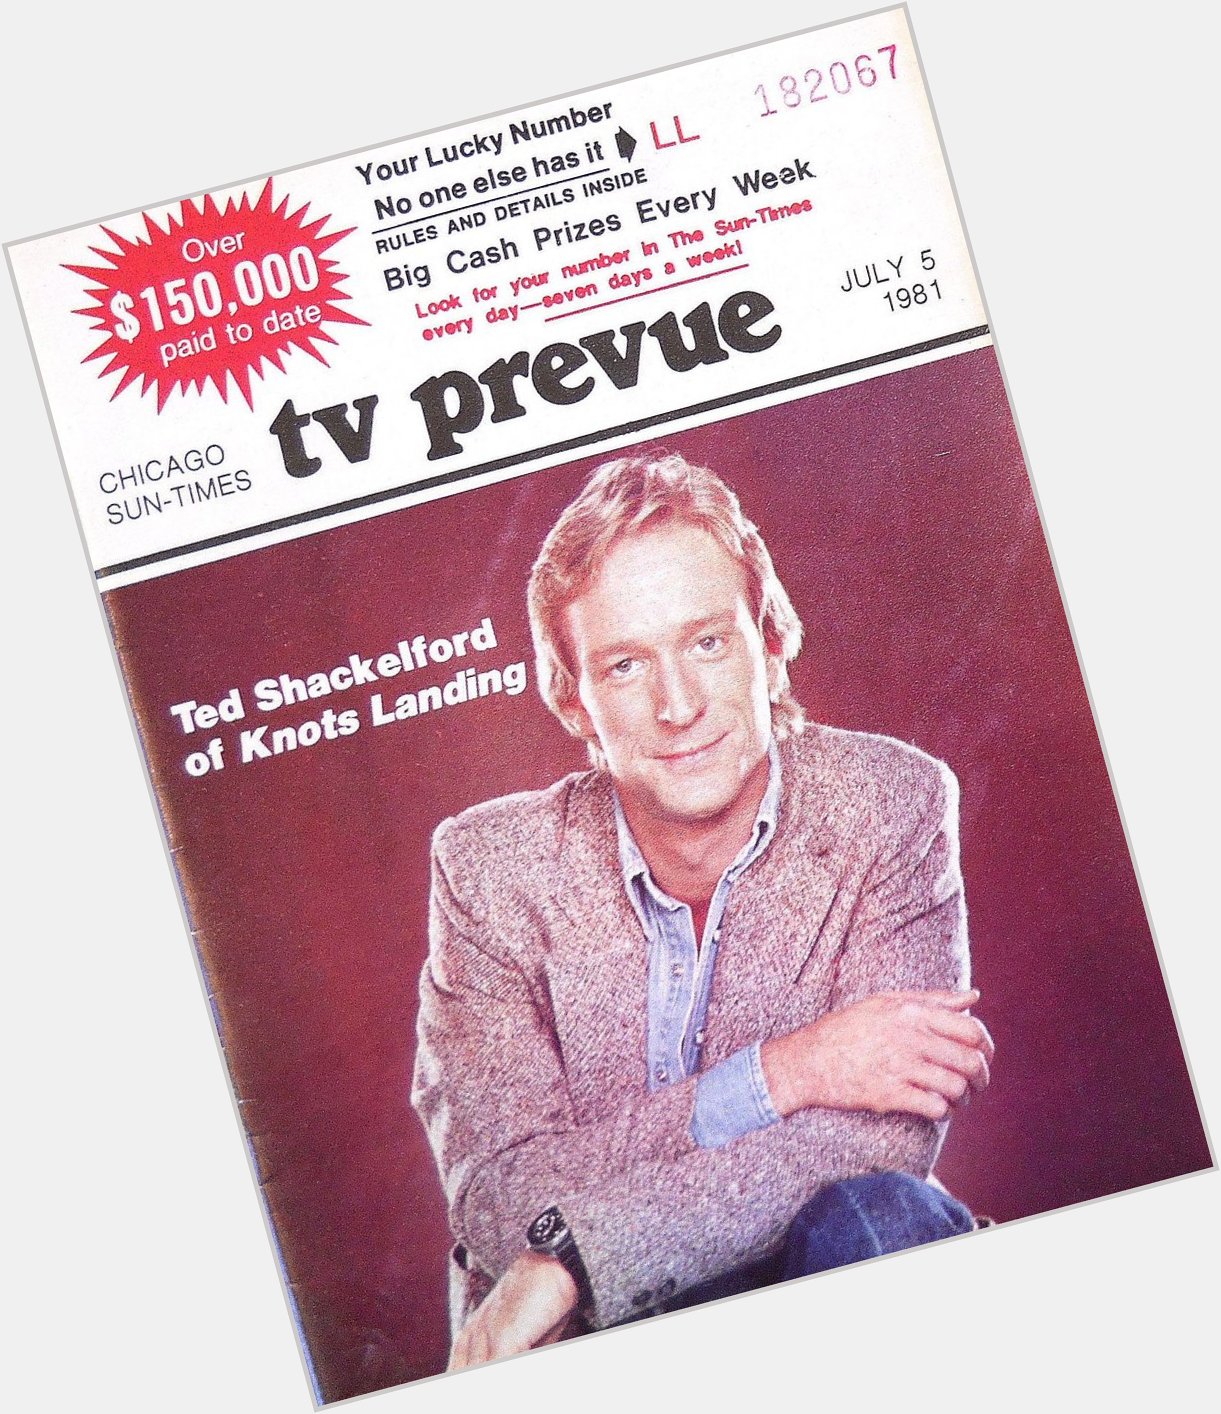 Happy Birthday to Ted Shackelford, born on this day in 1946
Chicago Sun-Times TV Prevue.  July 5-12, 1981 